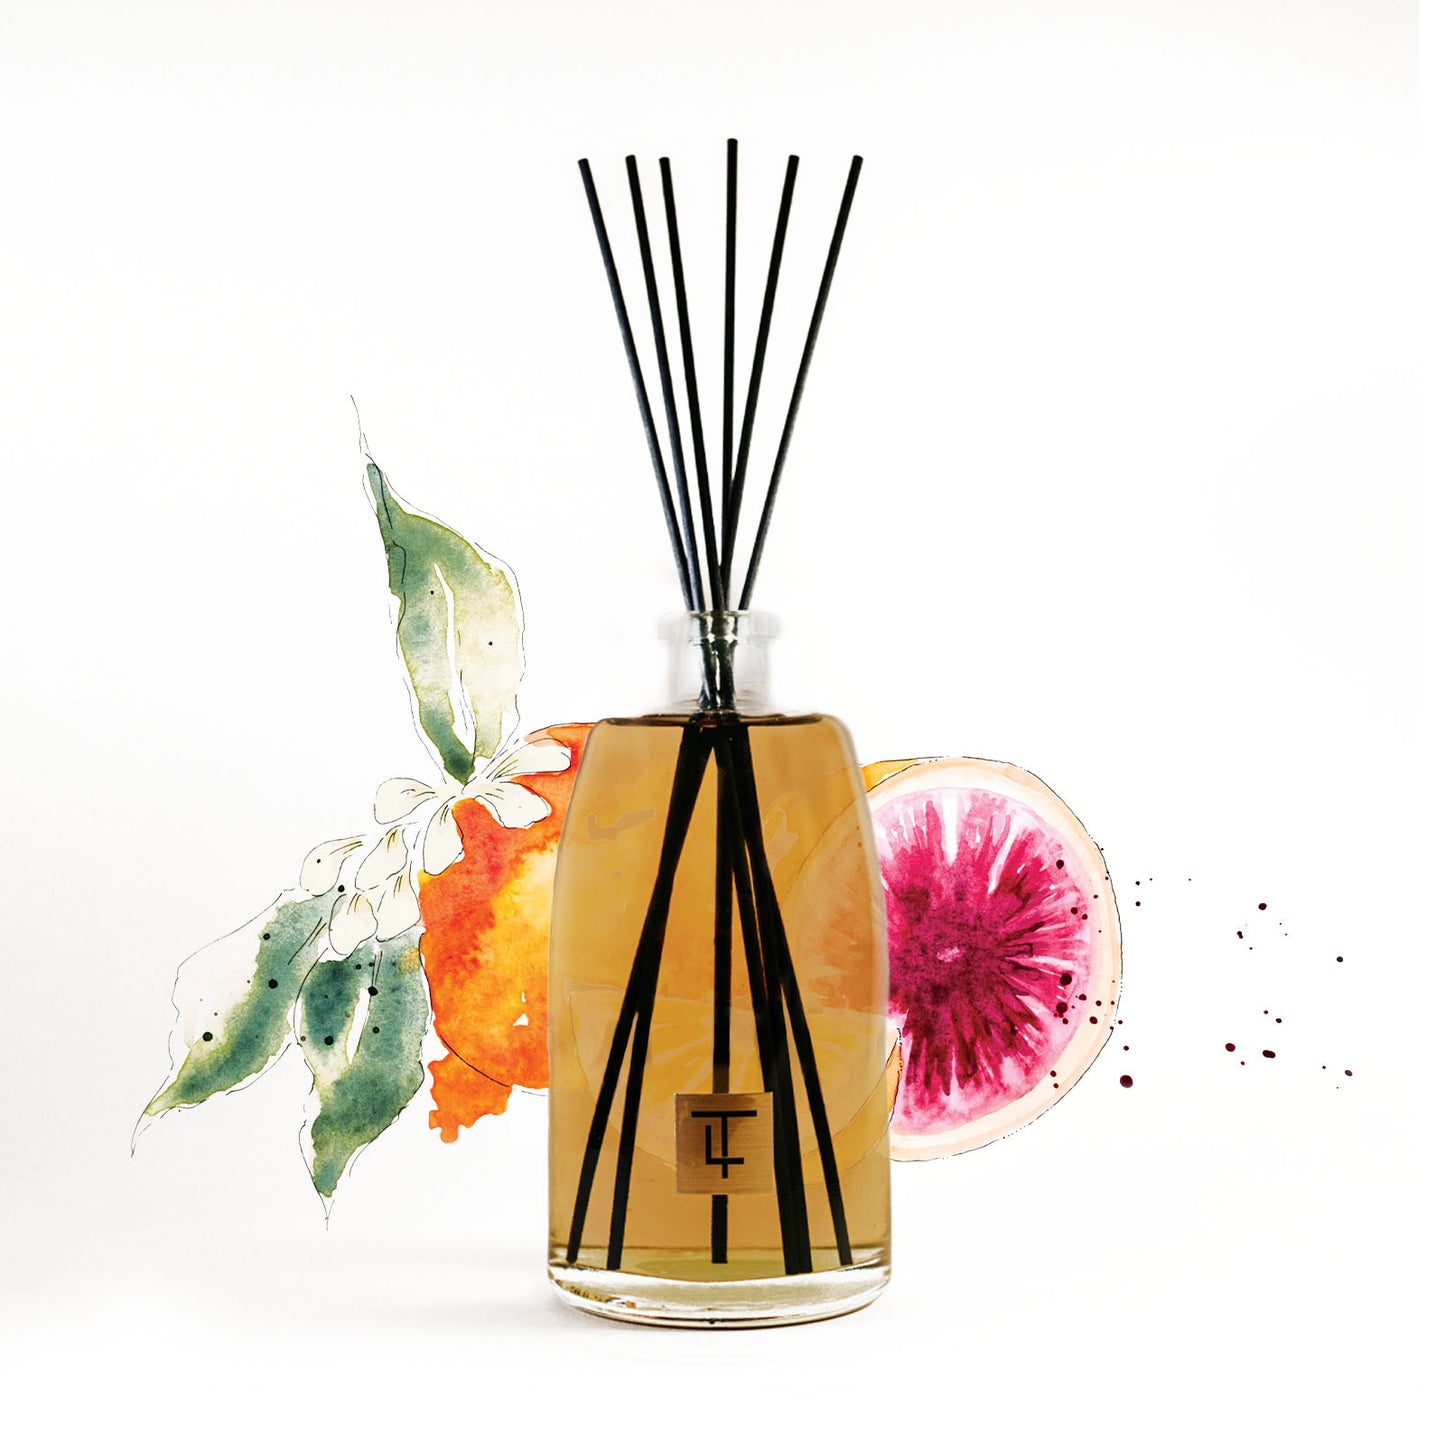 3 Litre Deluxe Diffuser - Mila - Pamplemousse and Sweet Orange